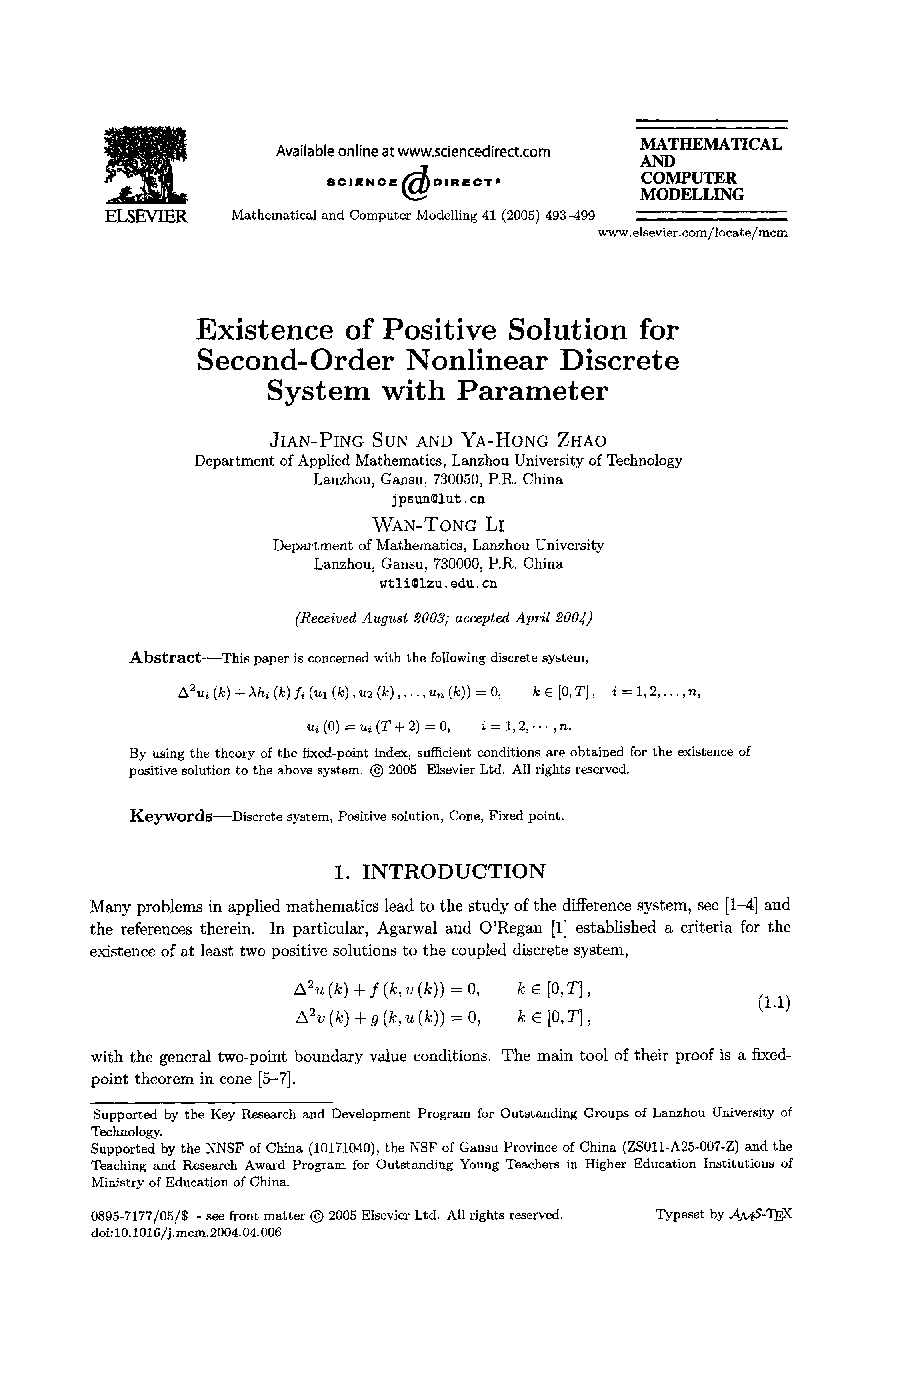 Existence of positive solution for second-order nonlinear discrete system with parameter